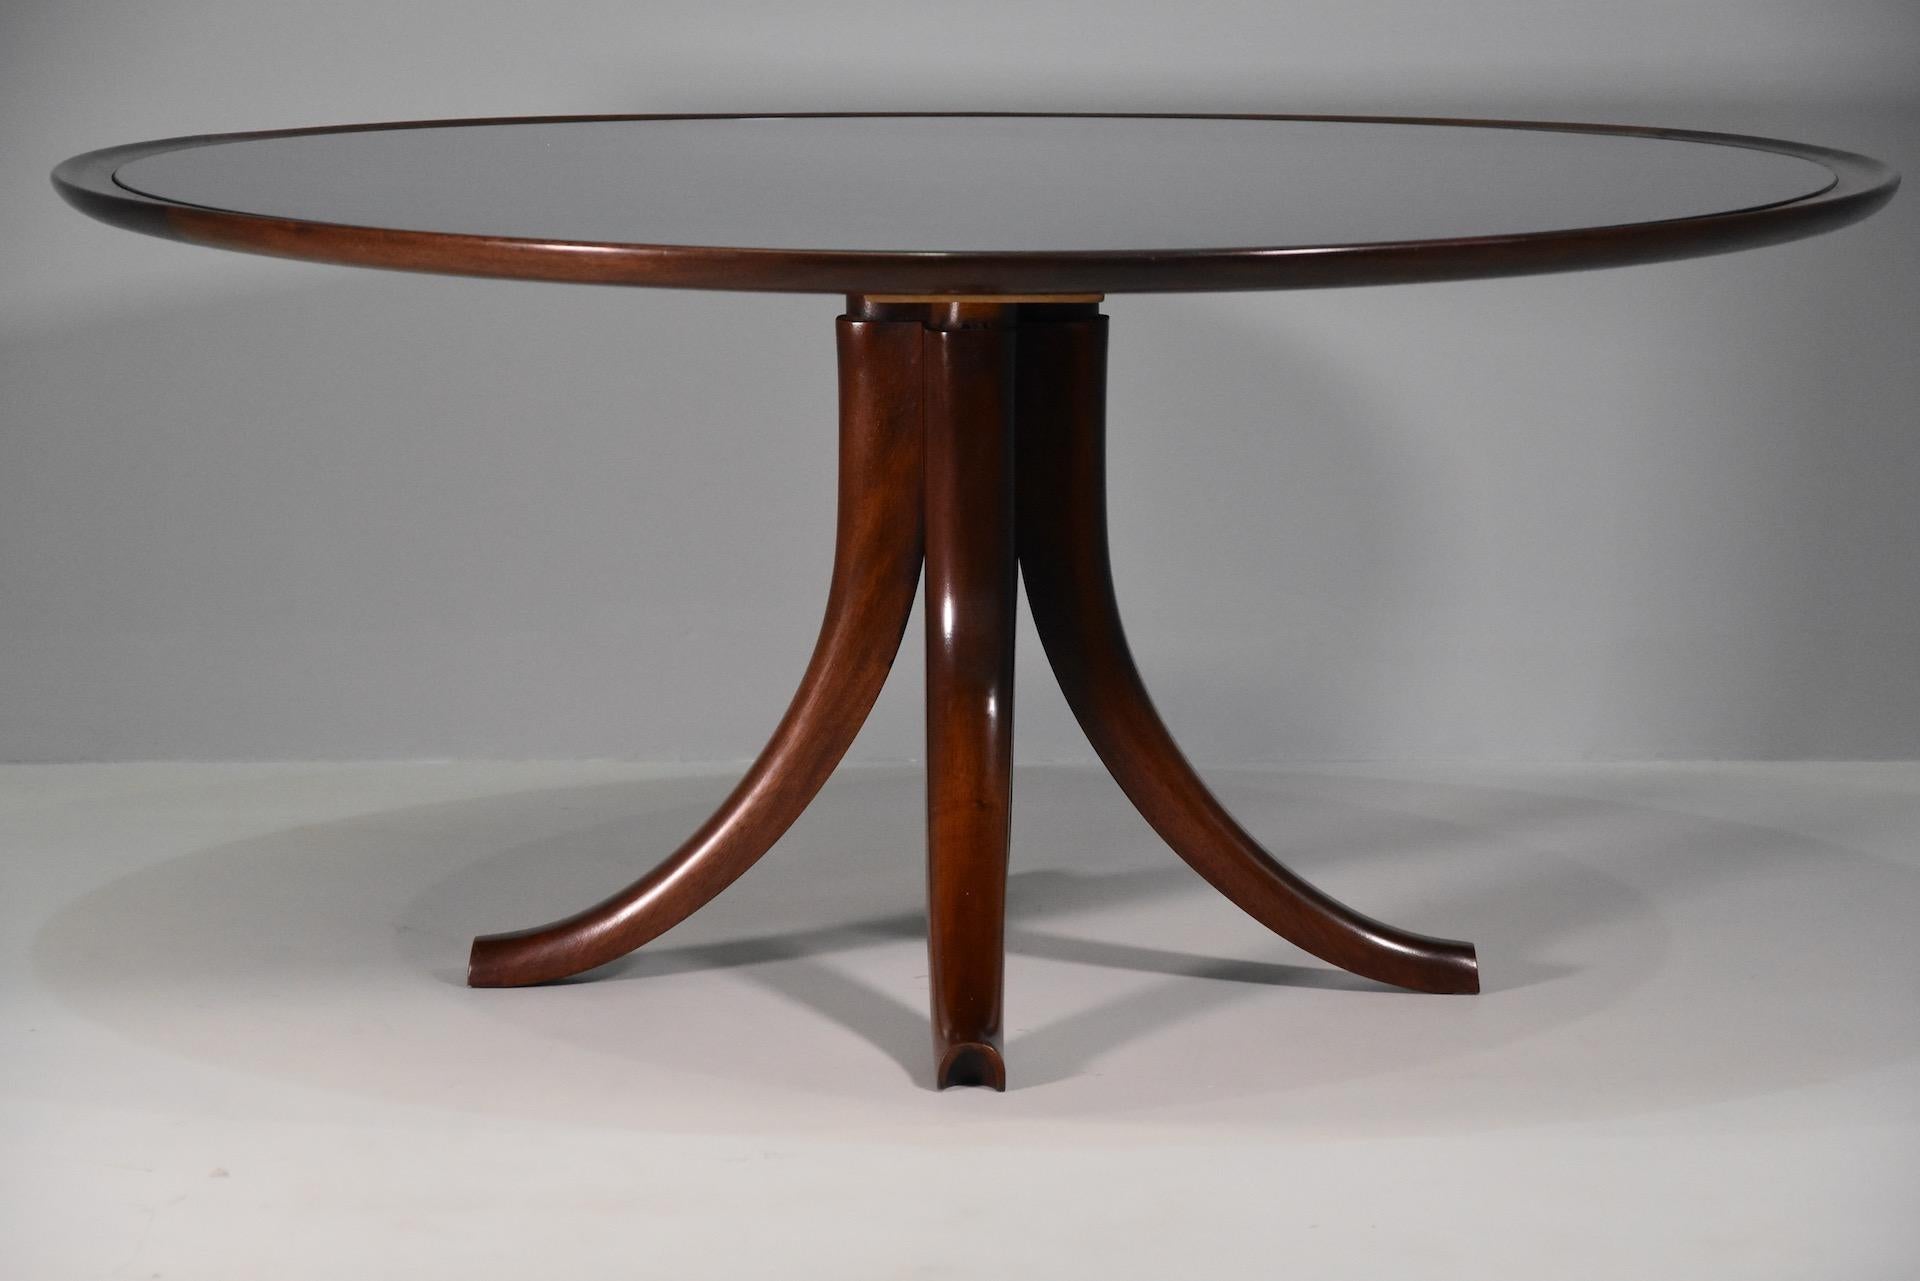 Rare Variant of Big Table Pietro Chiesa for Fontana Arte 1940 Whit Blue Mirror For Sale 2